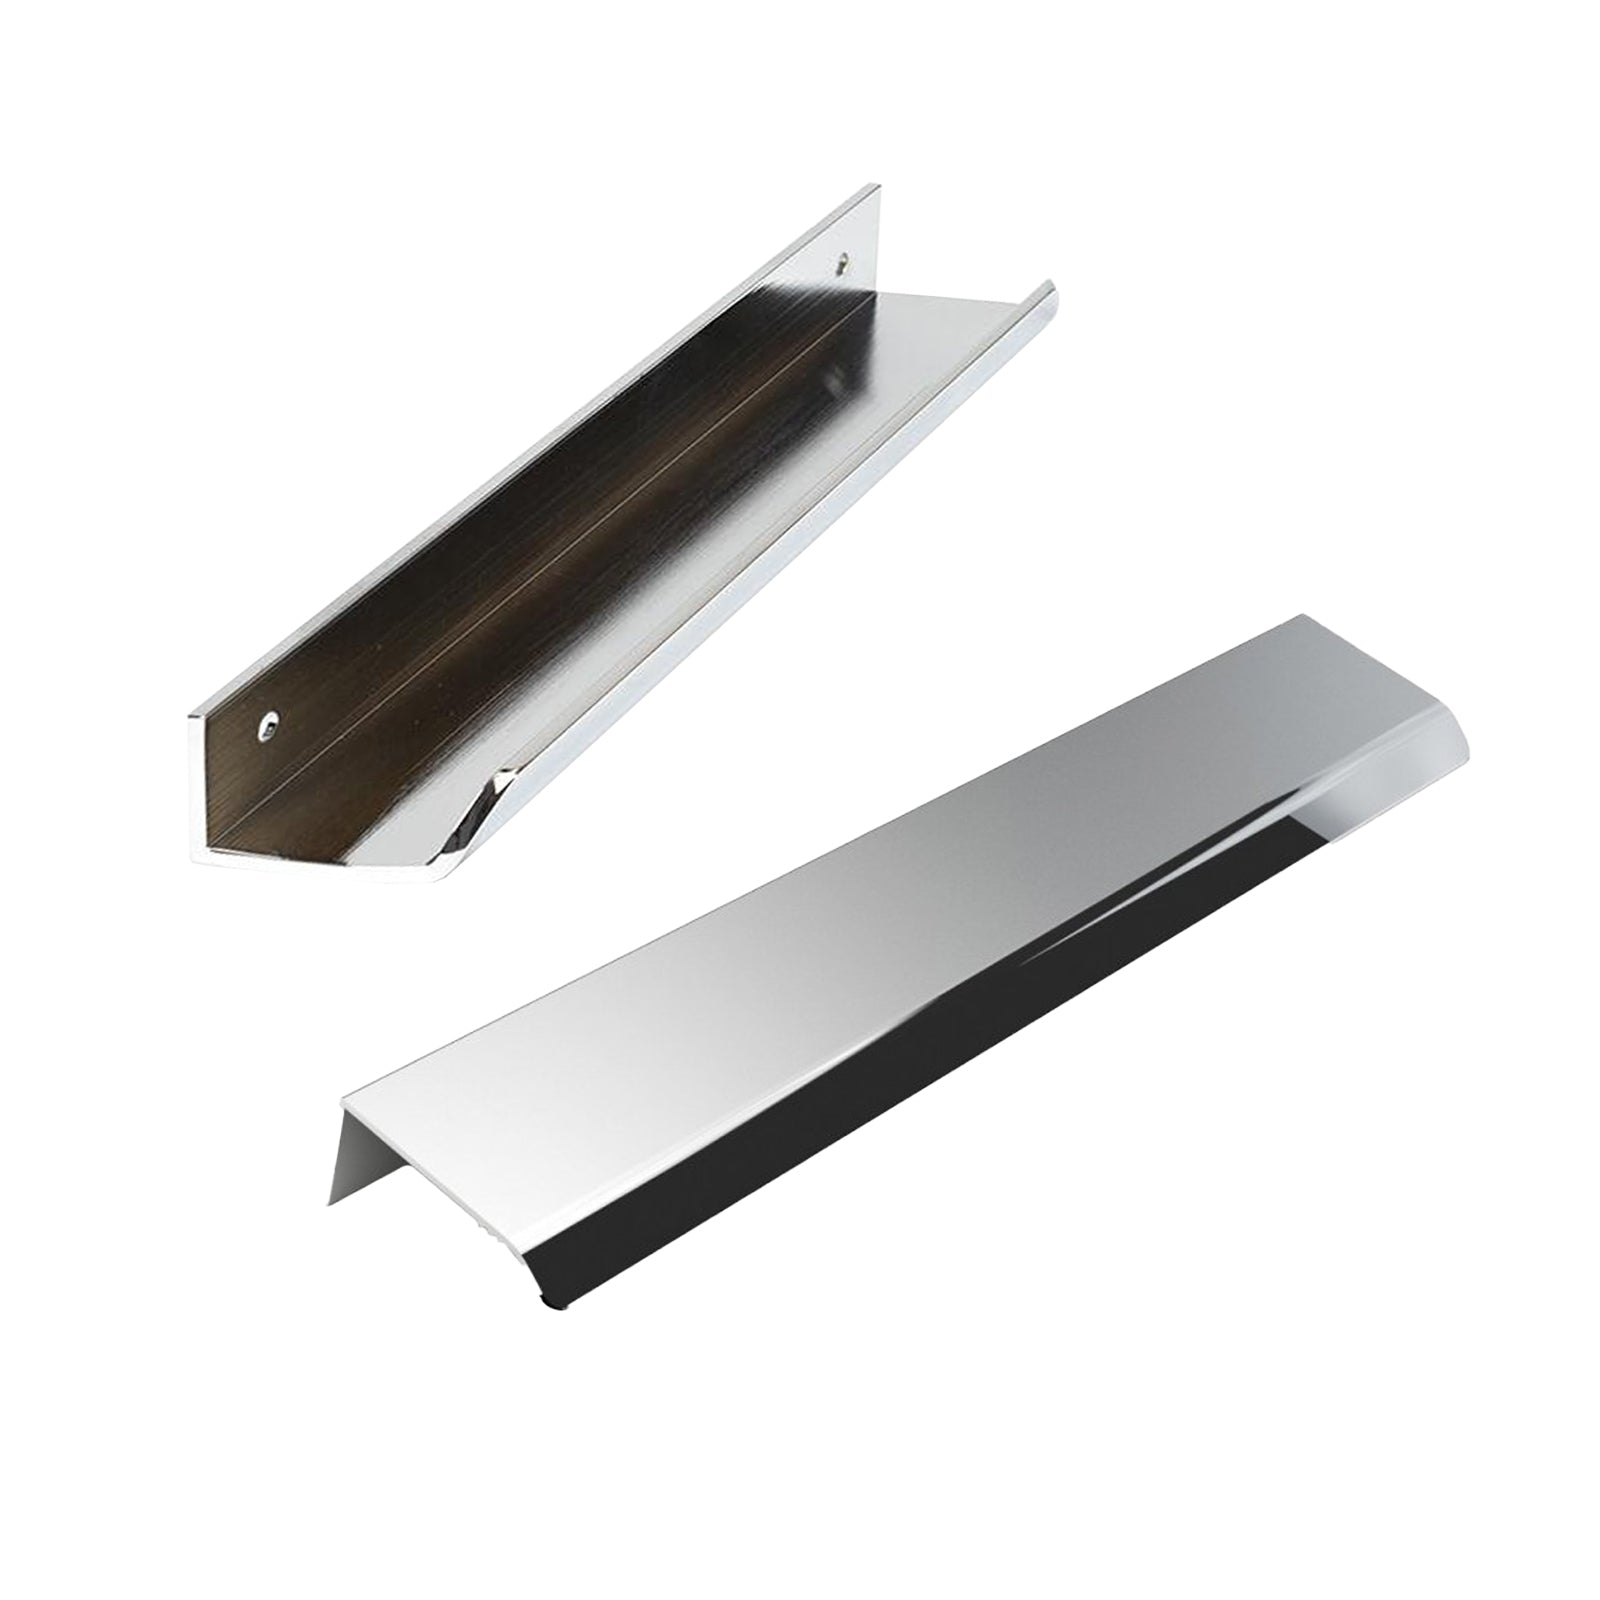 Bretford Chrome Handles for Vanity With Fixing (Pair)